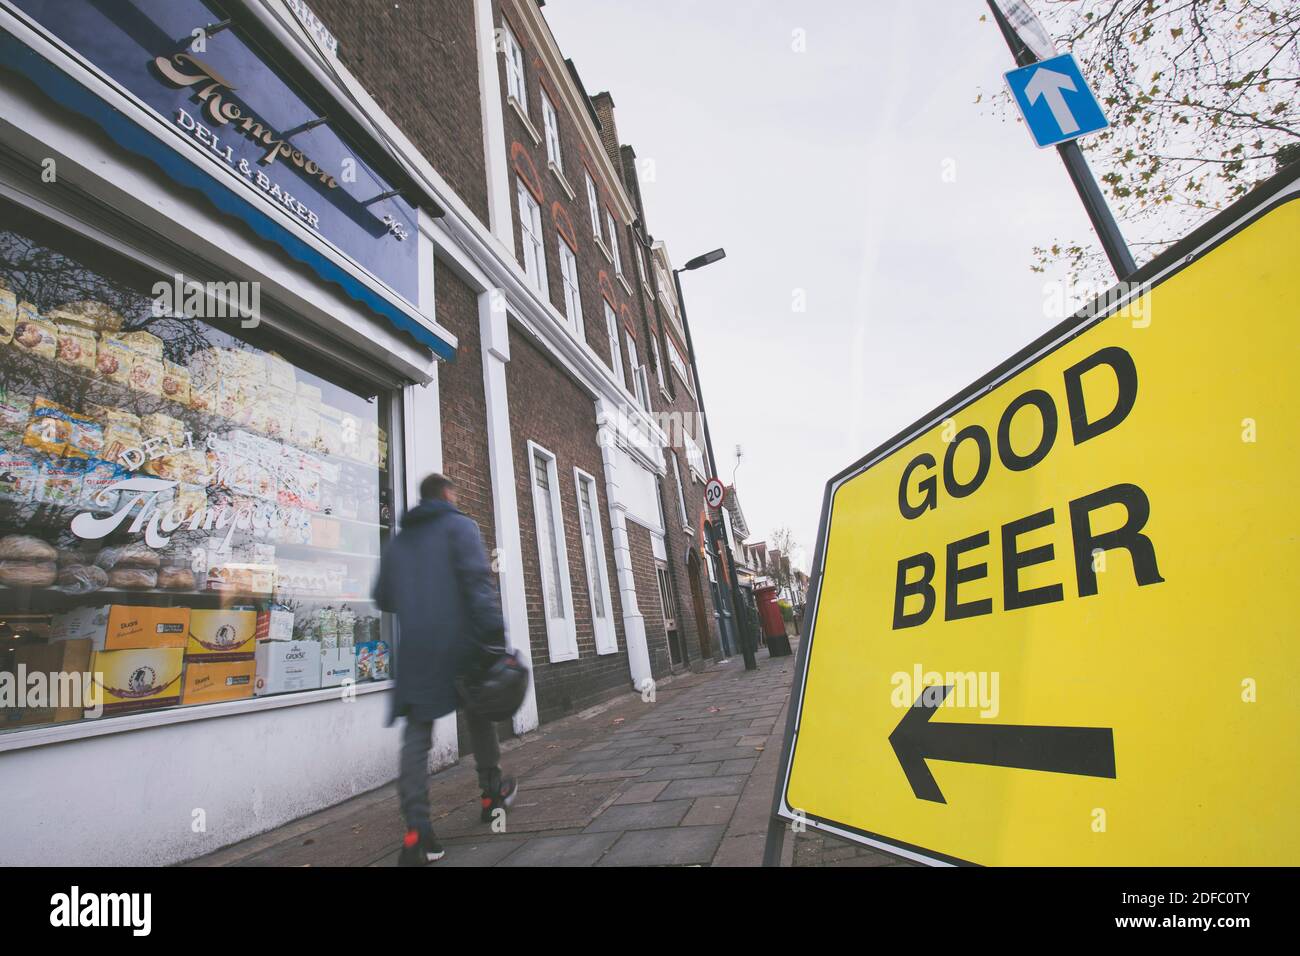 A "Good Beer" sign on Streatham High Road on the 13th November 2020 in London in the United Kingdom. Photo by Sam Mellish Stock Photo